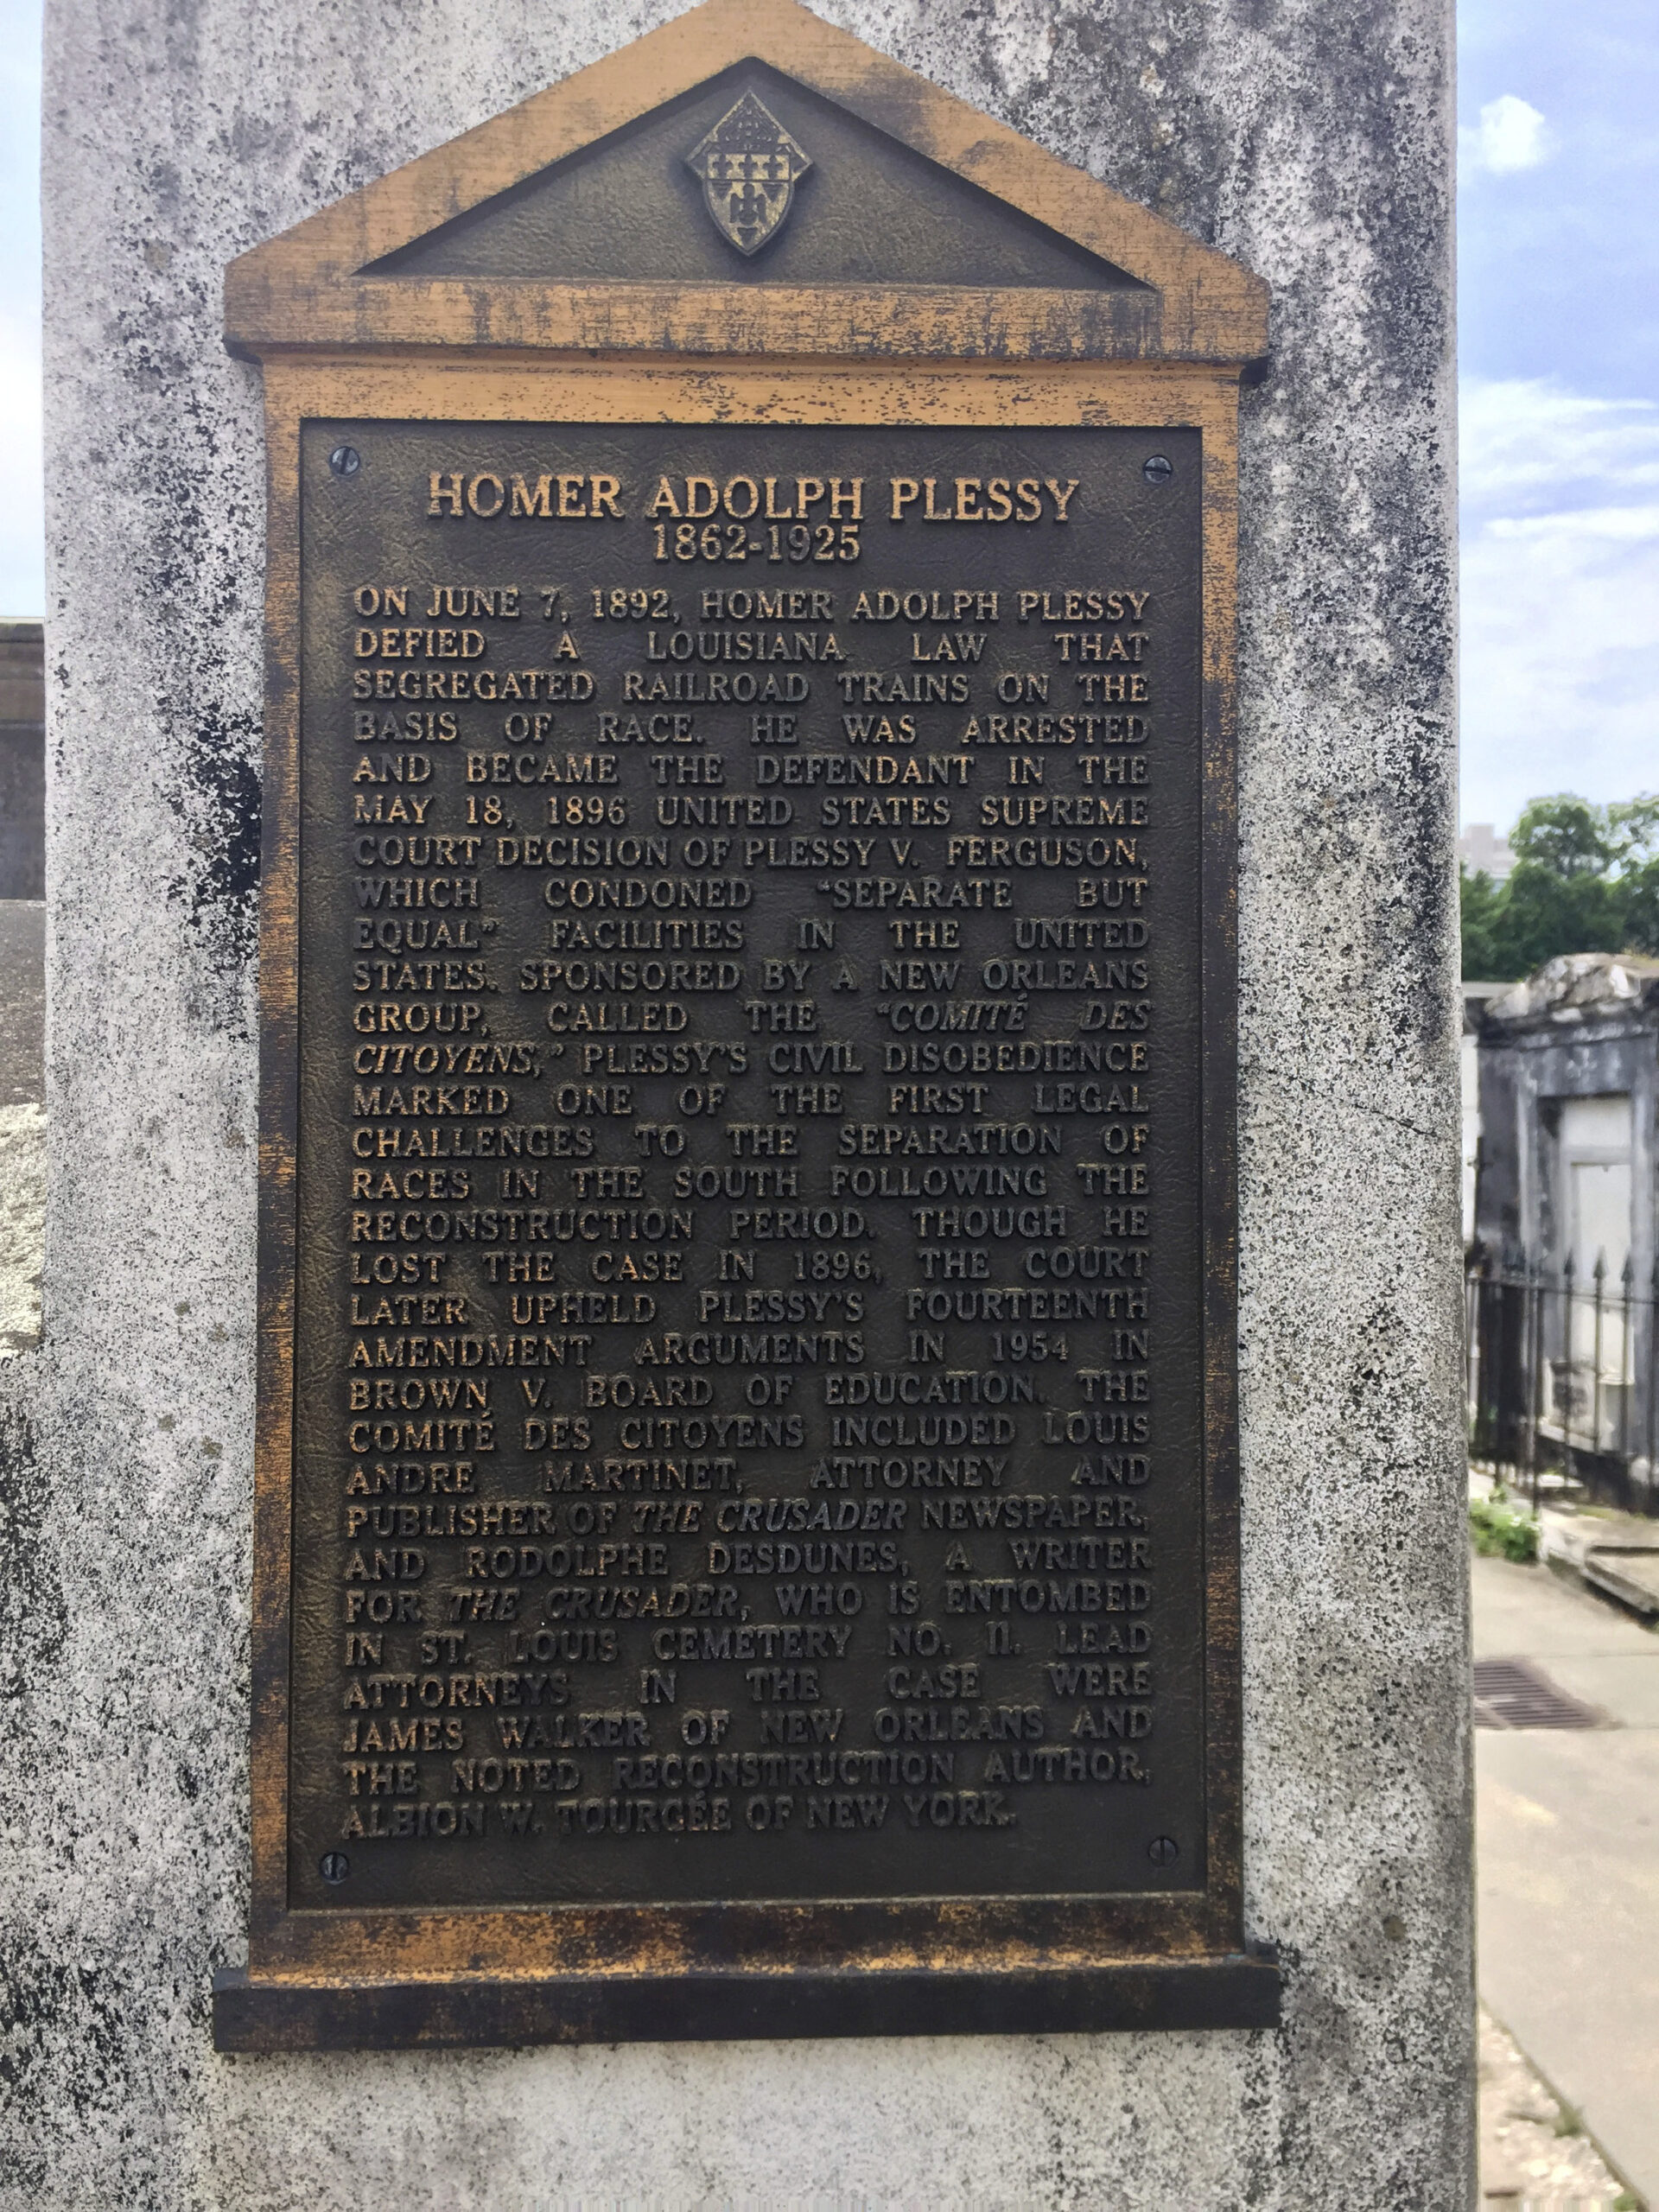 FILE - This June 3, 2018 photo shows a marker on the burial site for Homer Plessy at St. Louis No. 1 Cemetery in New Orleans. Homer Plessy, the namesake of the U.S. Supreme Court’s 1896 “separate but equal” ruling, is being considered for a posthumous pardon. The Creole man of color died with a conviction still on his record for refusing to leave a whites-only train car in New Orleans in 1892. (AP Photo/Beth J. Harpaz, File)